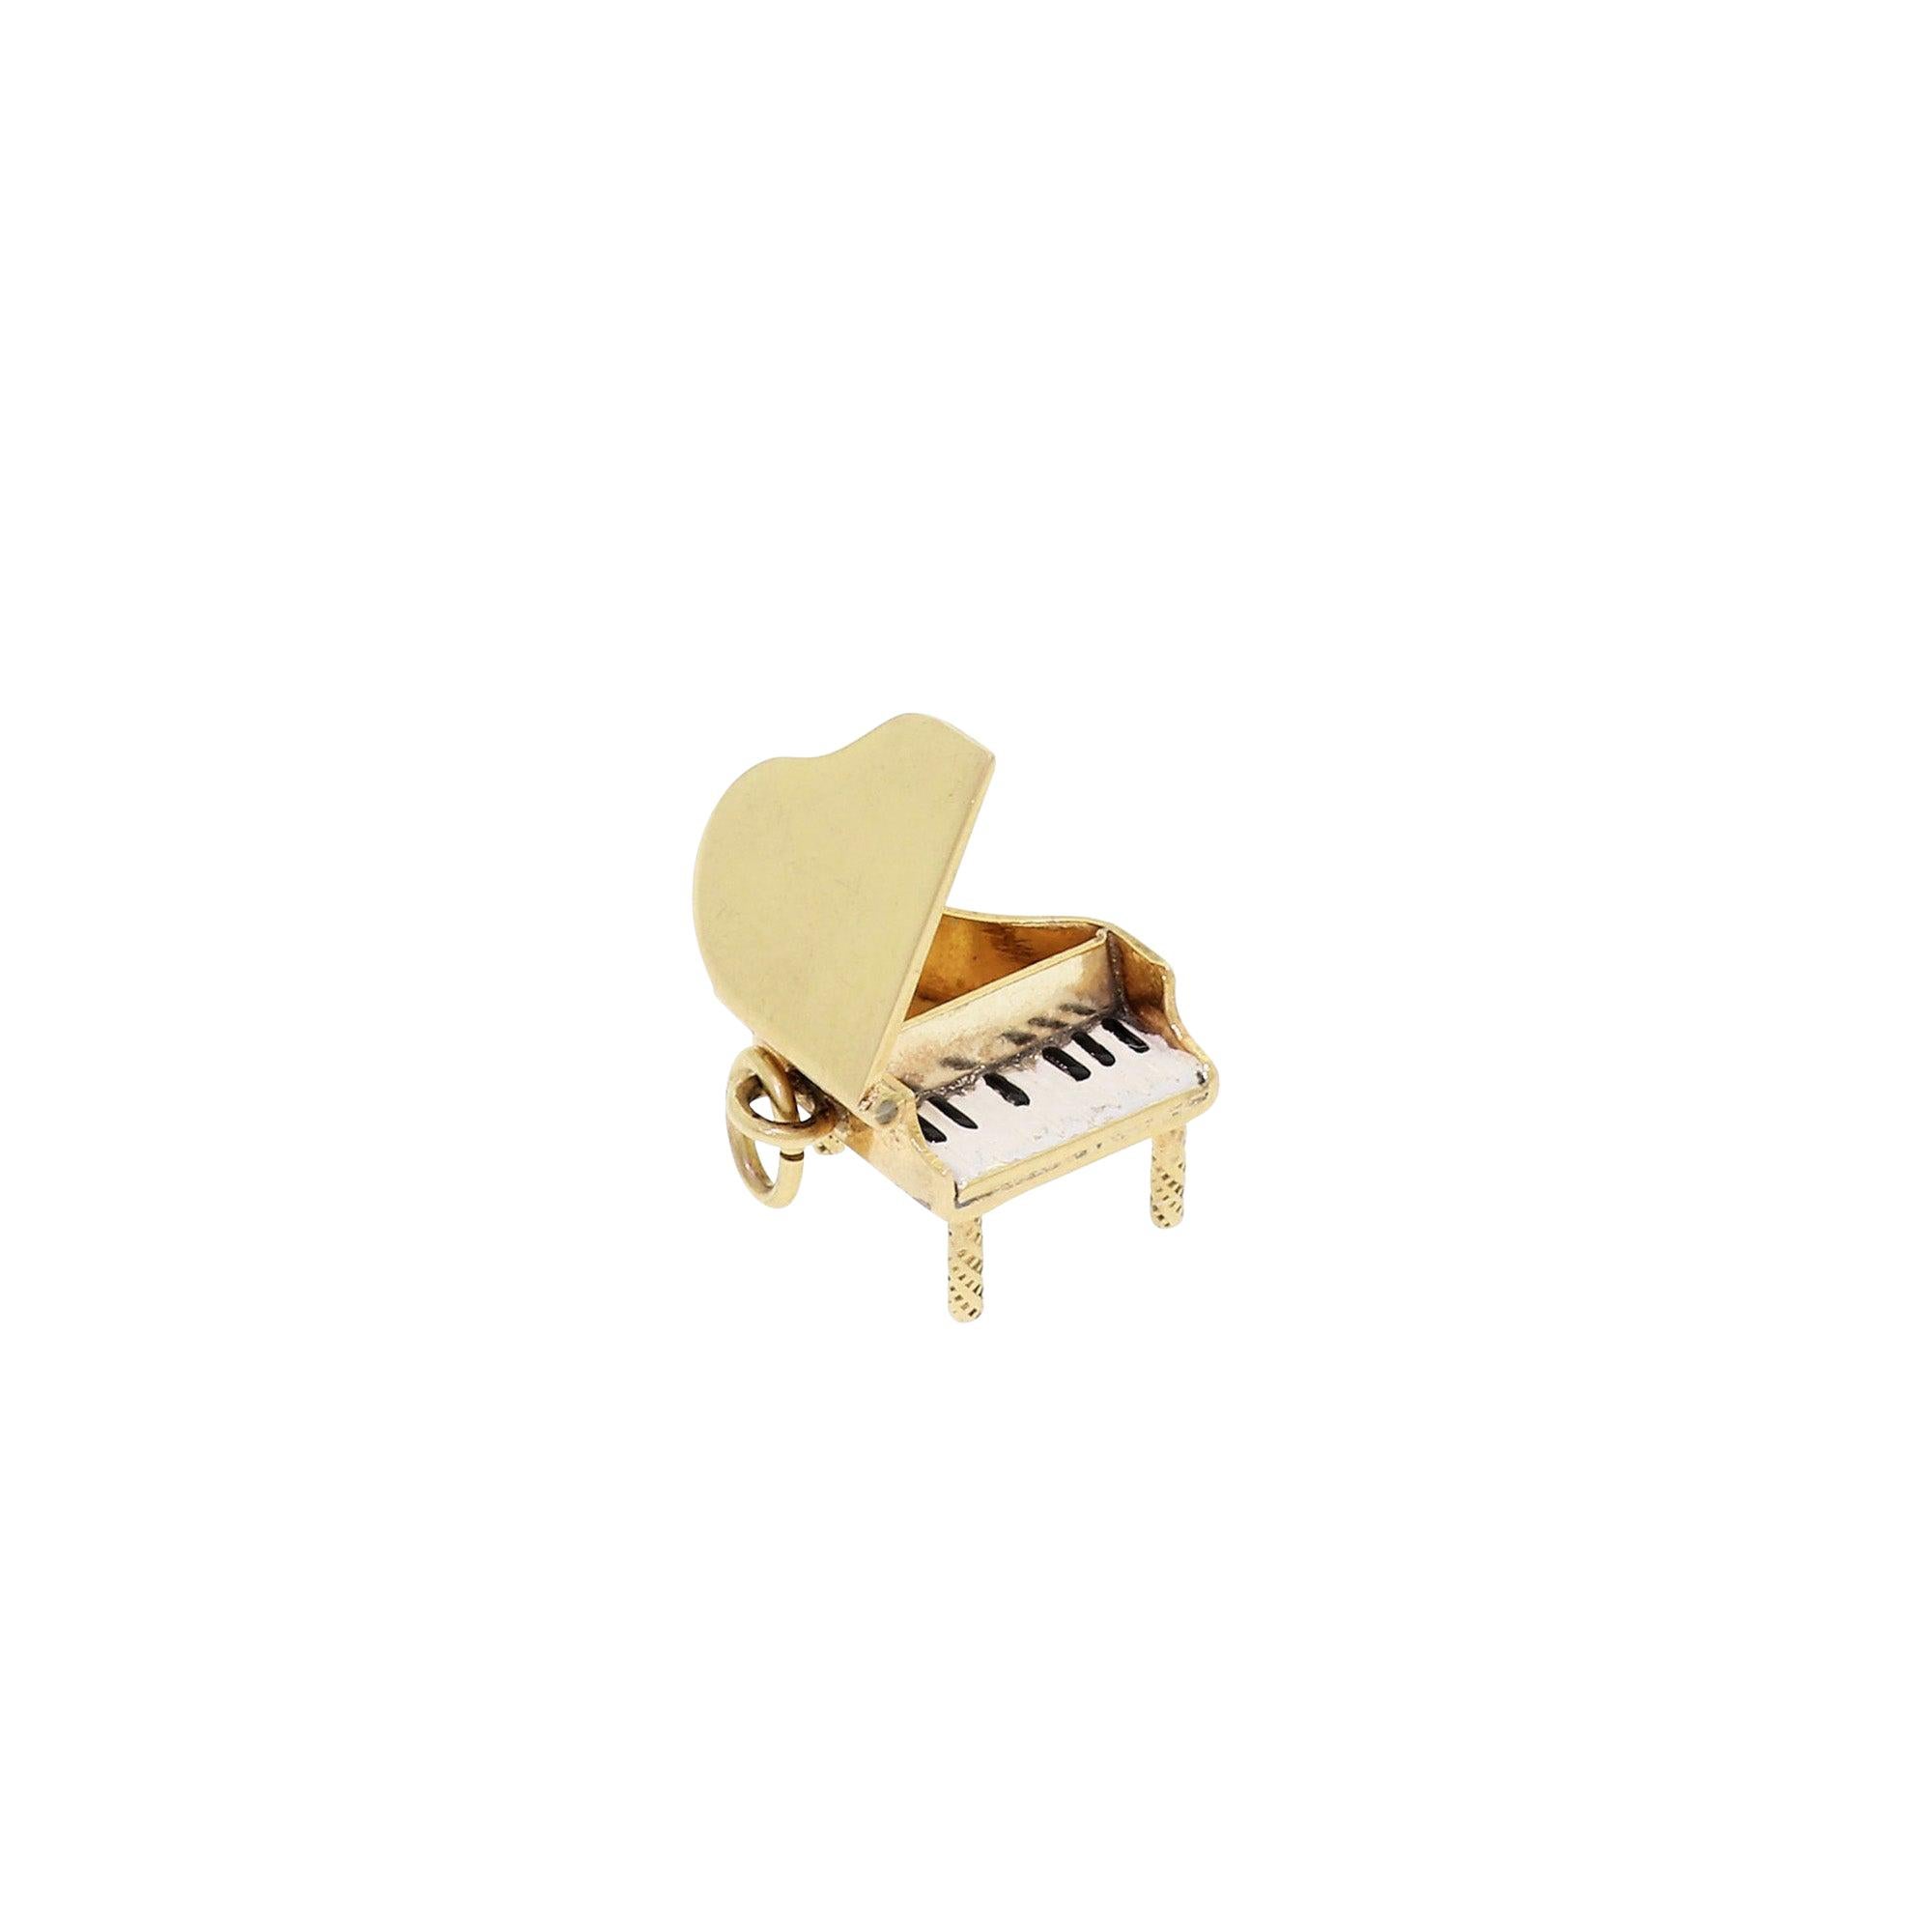 14K Yellow Gold & Enamel Baby Grand Piano Vintage Articulated Charm For Bracelet